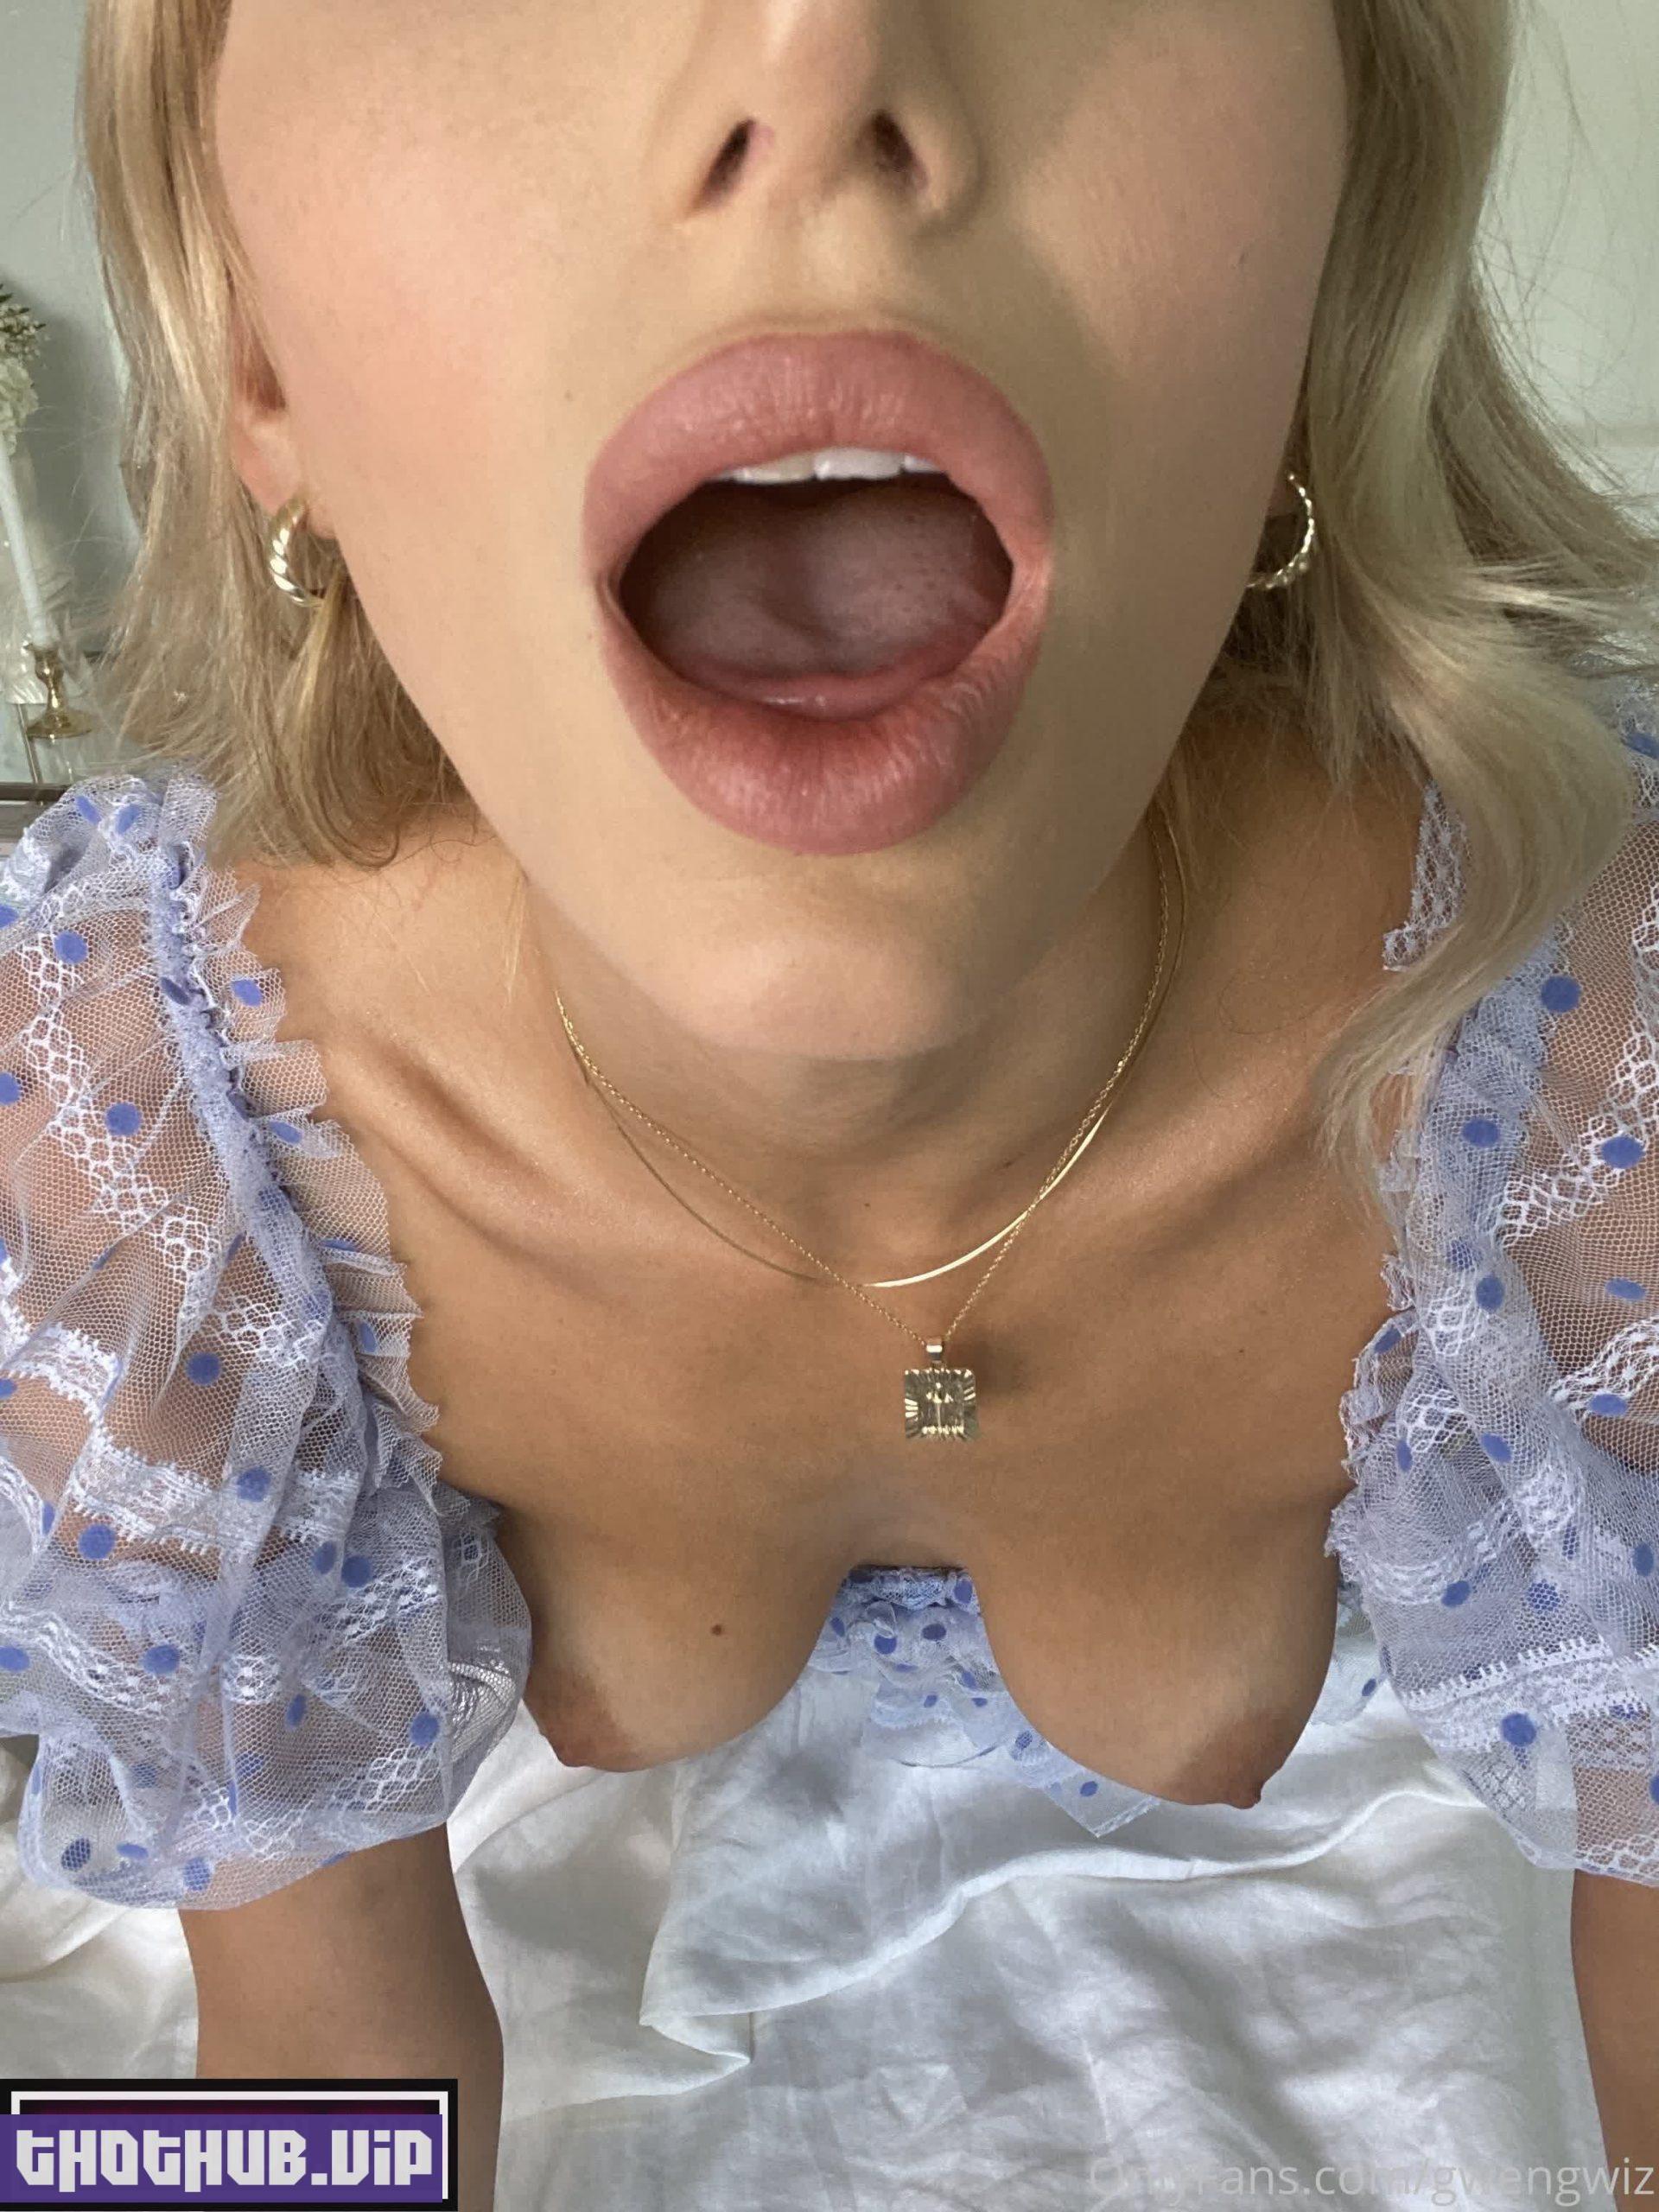 1689069256 765 Gwengwiz %E2%80%93 Busty Blonde Onlyfans Sextapes Nudes